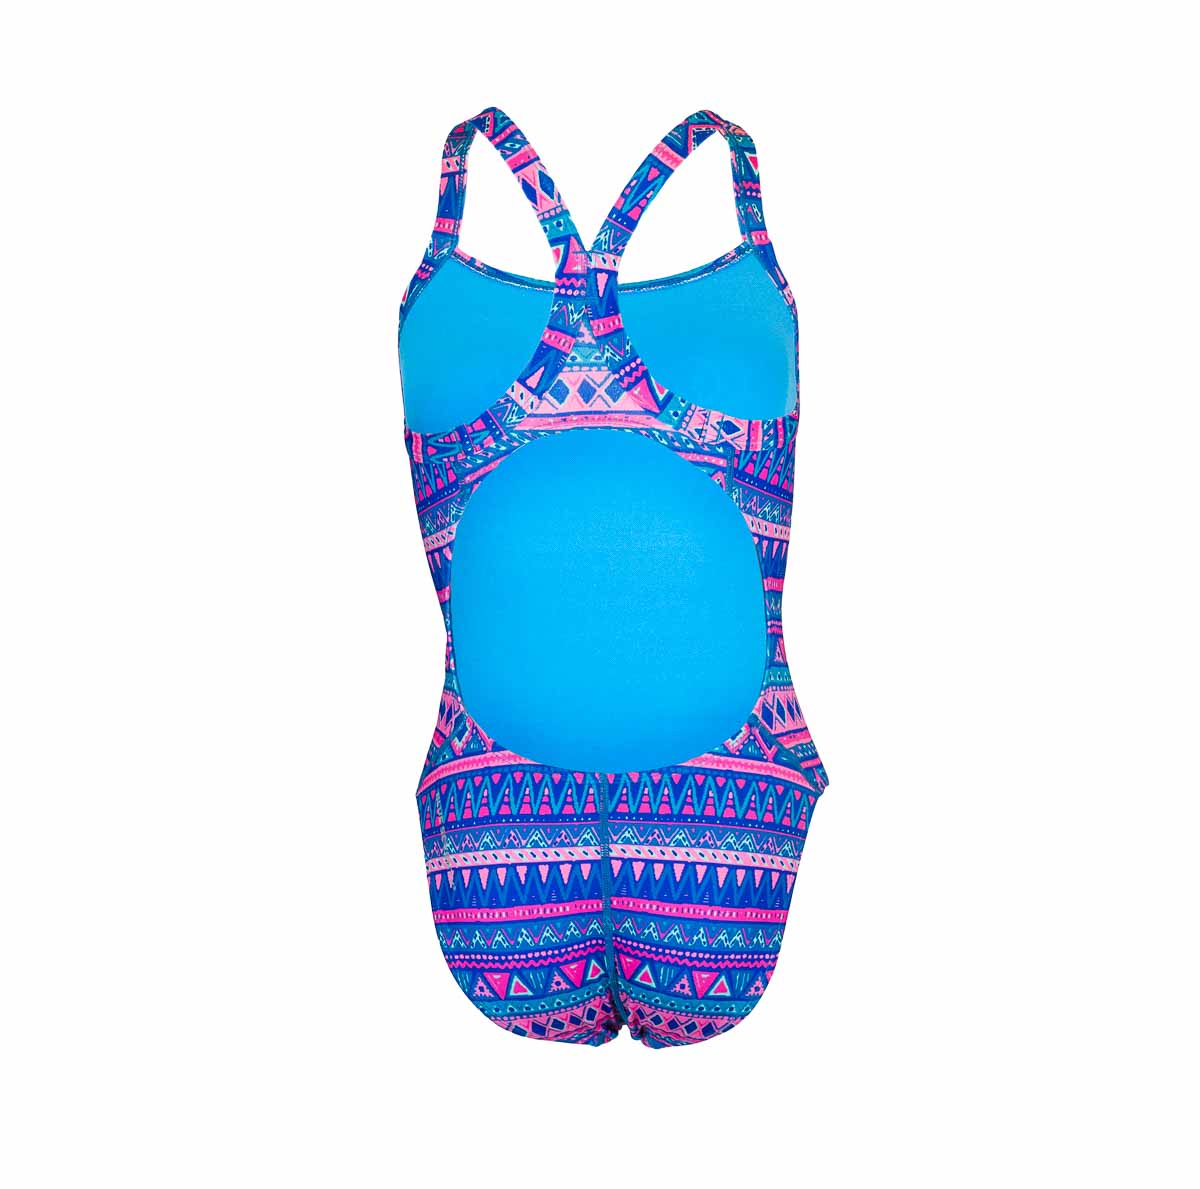 Review of a one-piece Jolyn athletic swimsuit (non-Polish but full